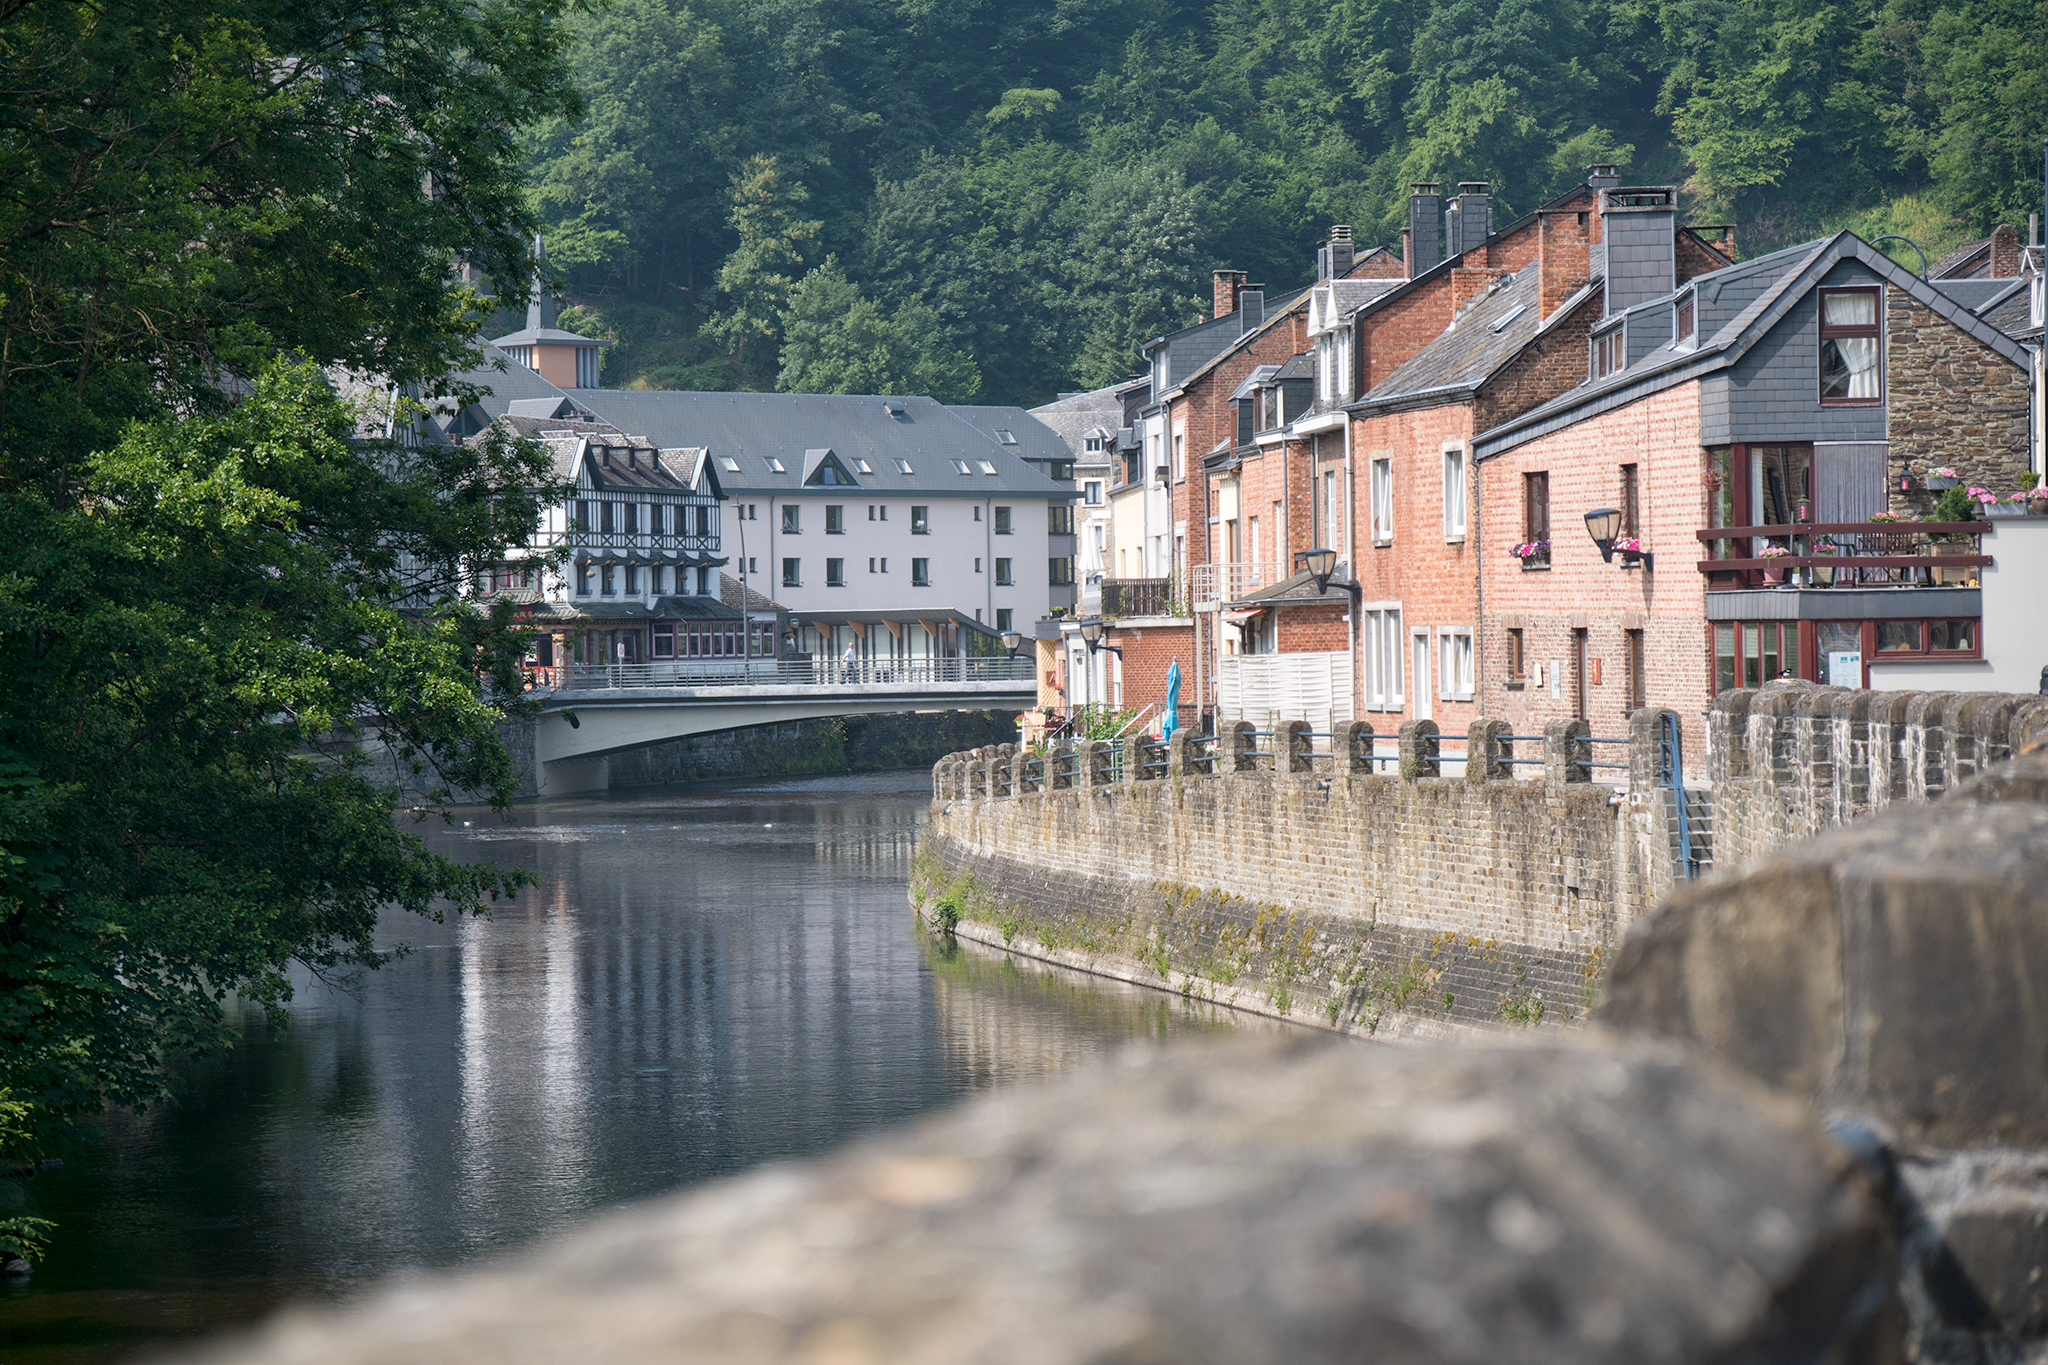  When I reach La Roche-en-Ardenne, I lock my bike outside a store and head inside to resupply and escape the stifling midday heat. At the end of one of the store aisles an older man wearing a beret stands with a lazy grin on his face and one hand in 